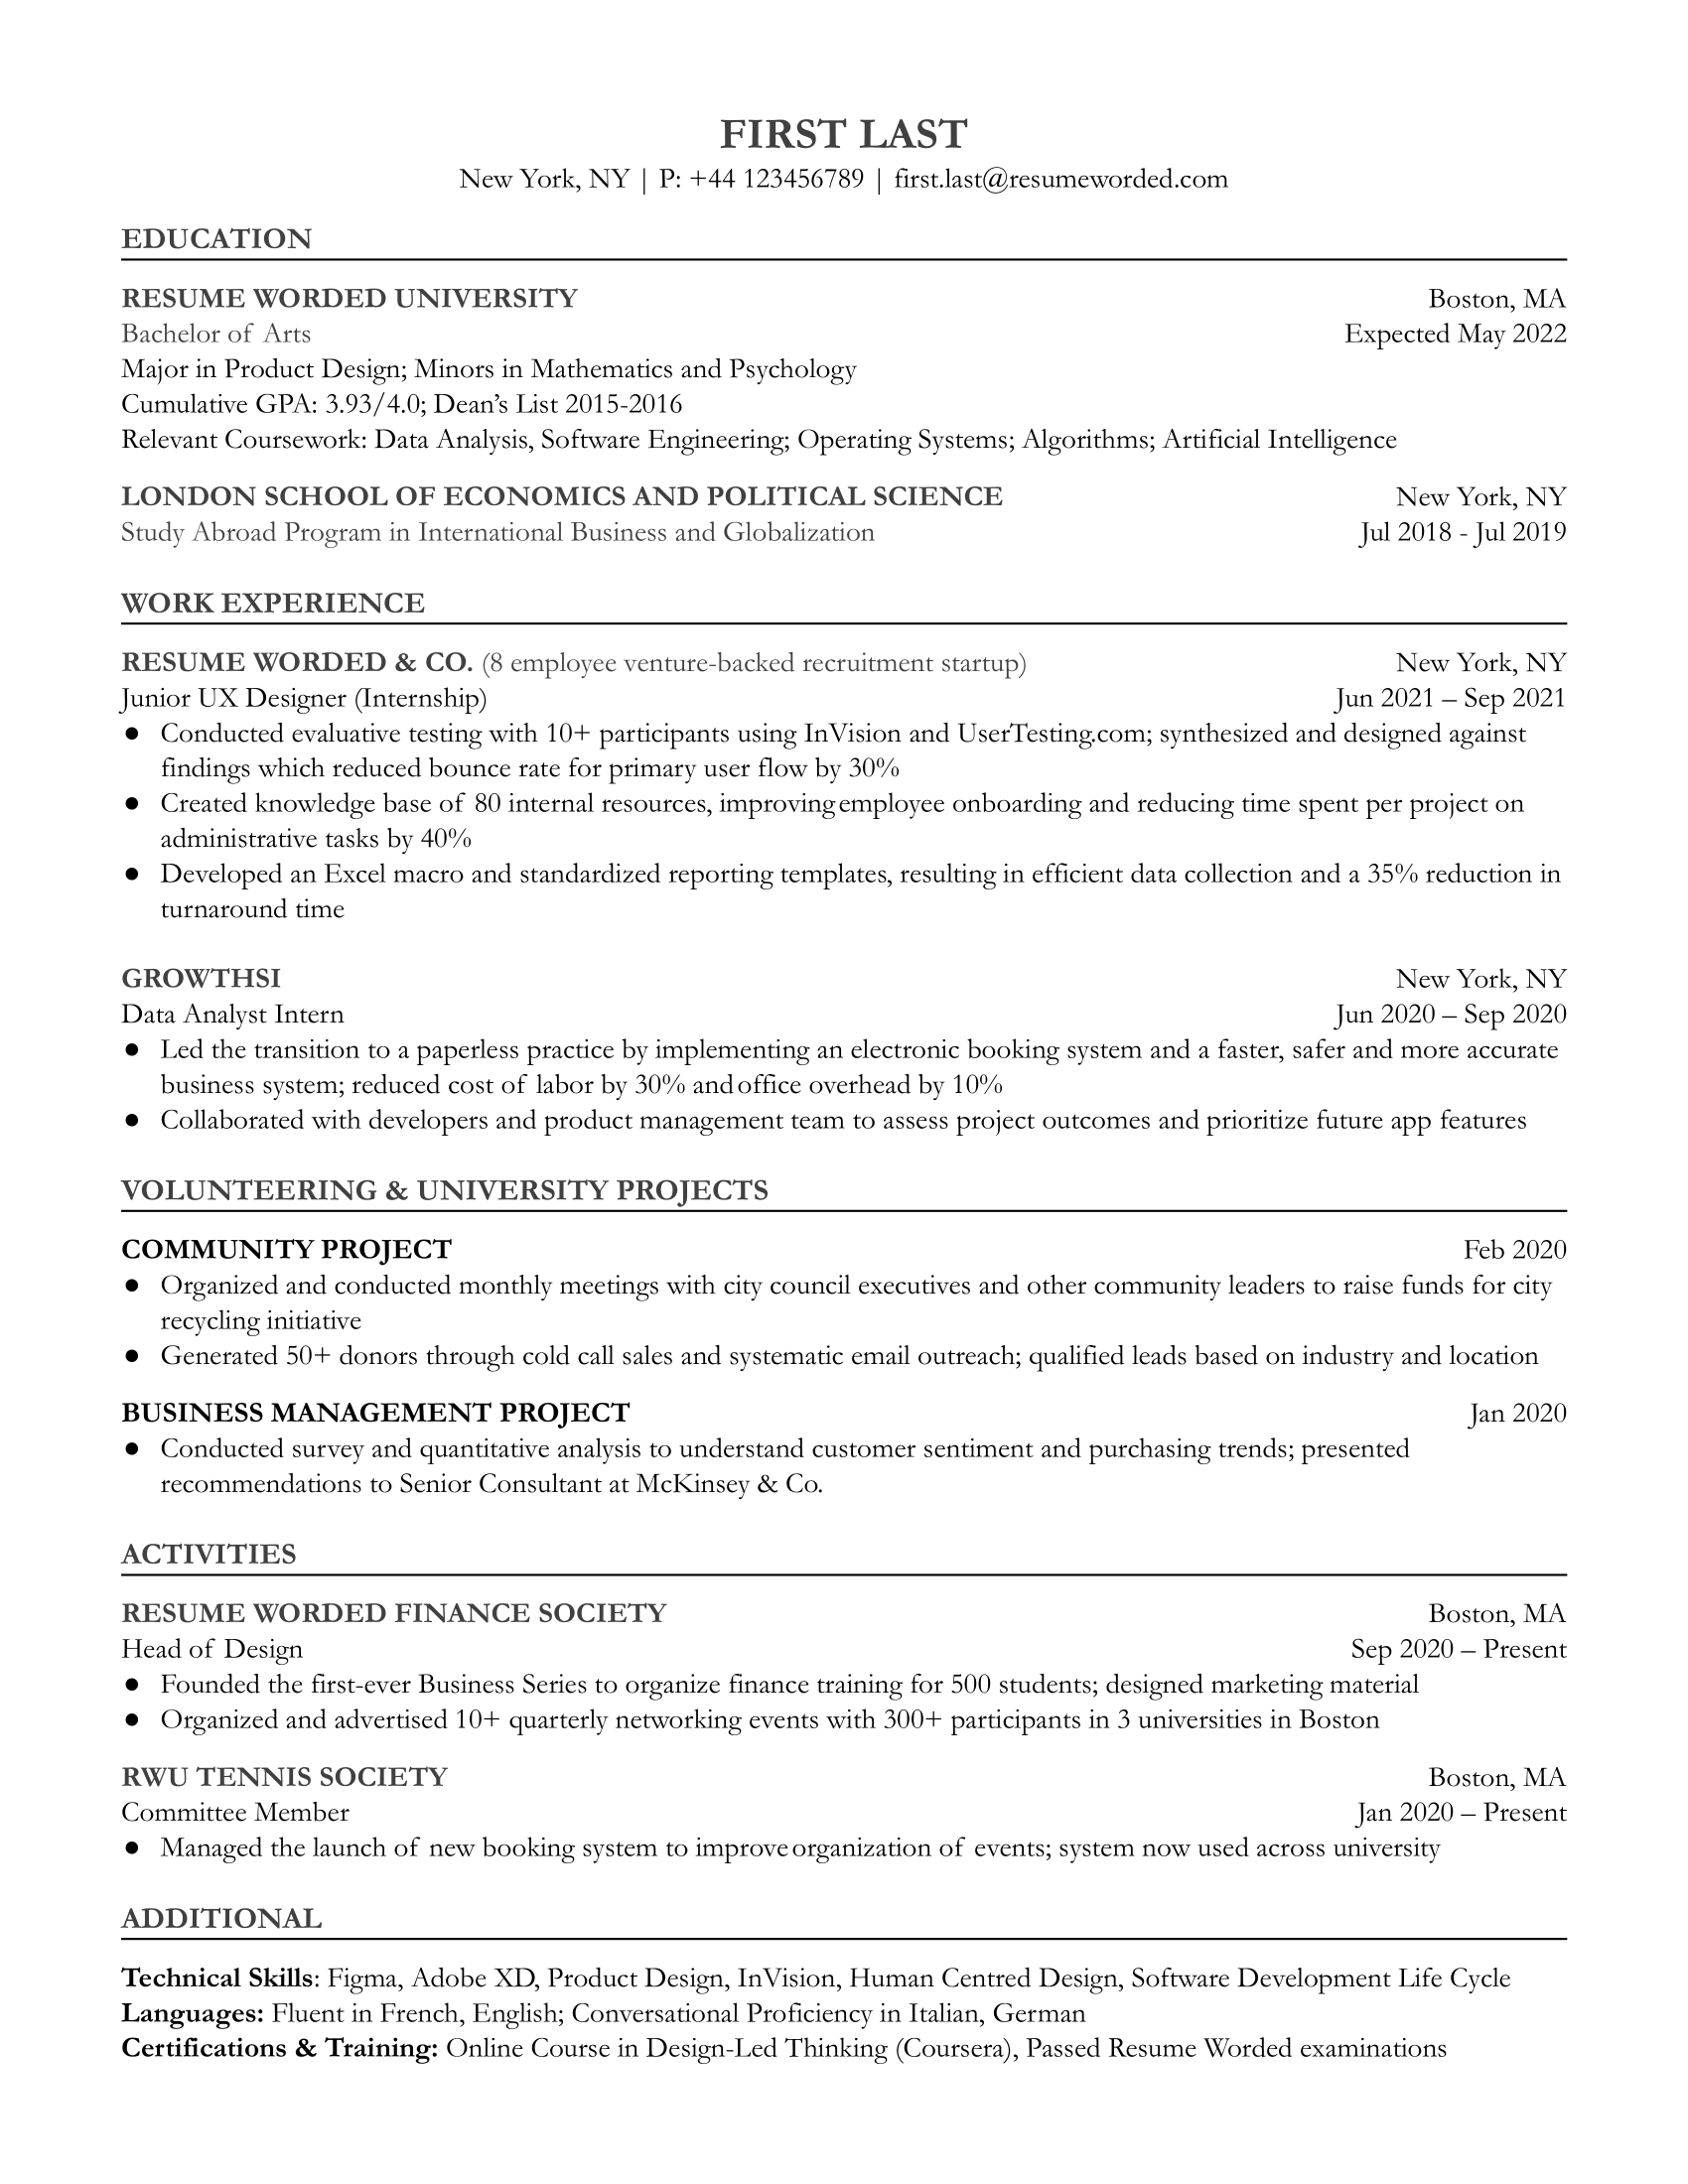 Resume sample for an entry level UX designer highlighting relevant internships and university projects